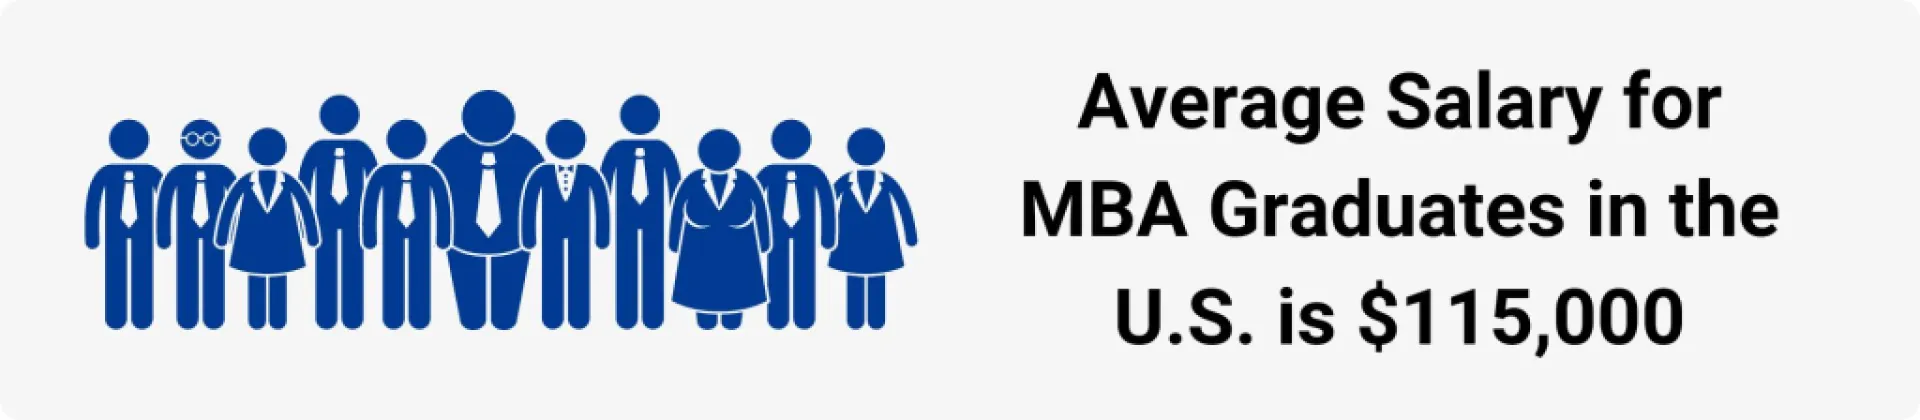 Average Salary for MBA Graduates in the U.S.